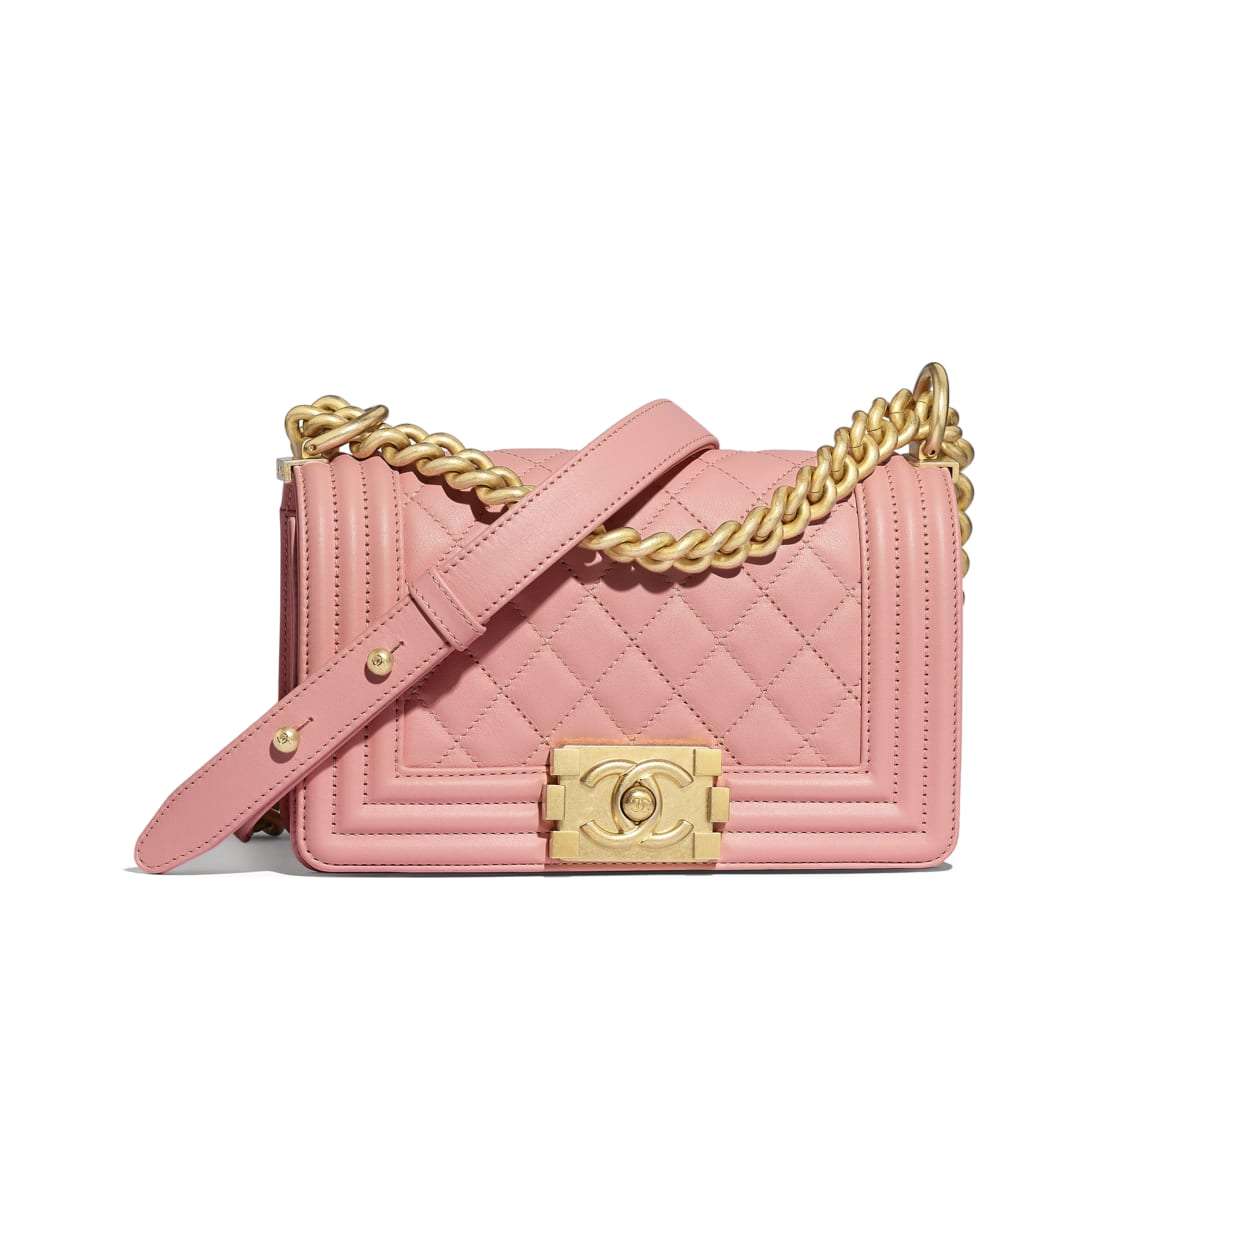 The Most Popular Chanel Bag of 2019